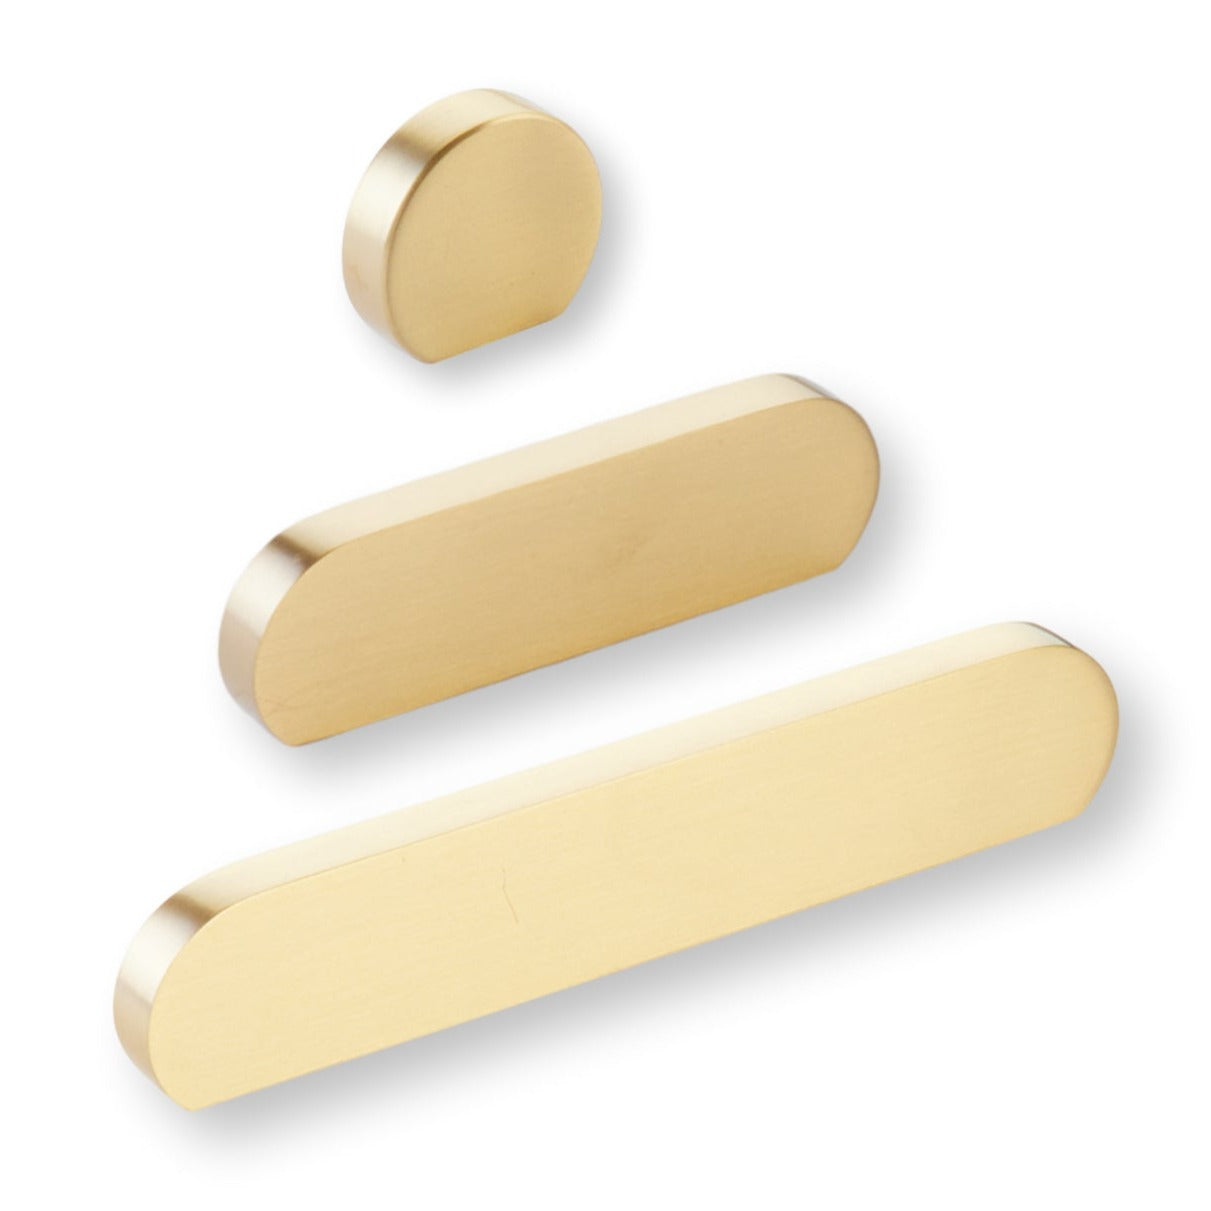 Satin Brass "Bit" Rounded Drawer Pulls and Cabinet Knobs - Industry Hardware